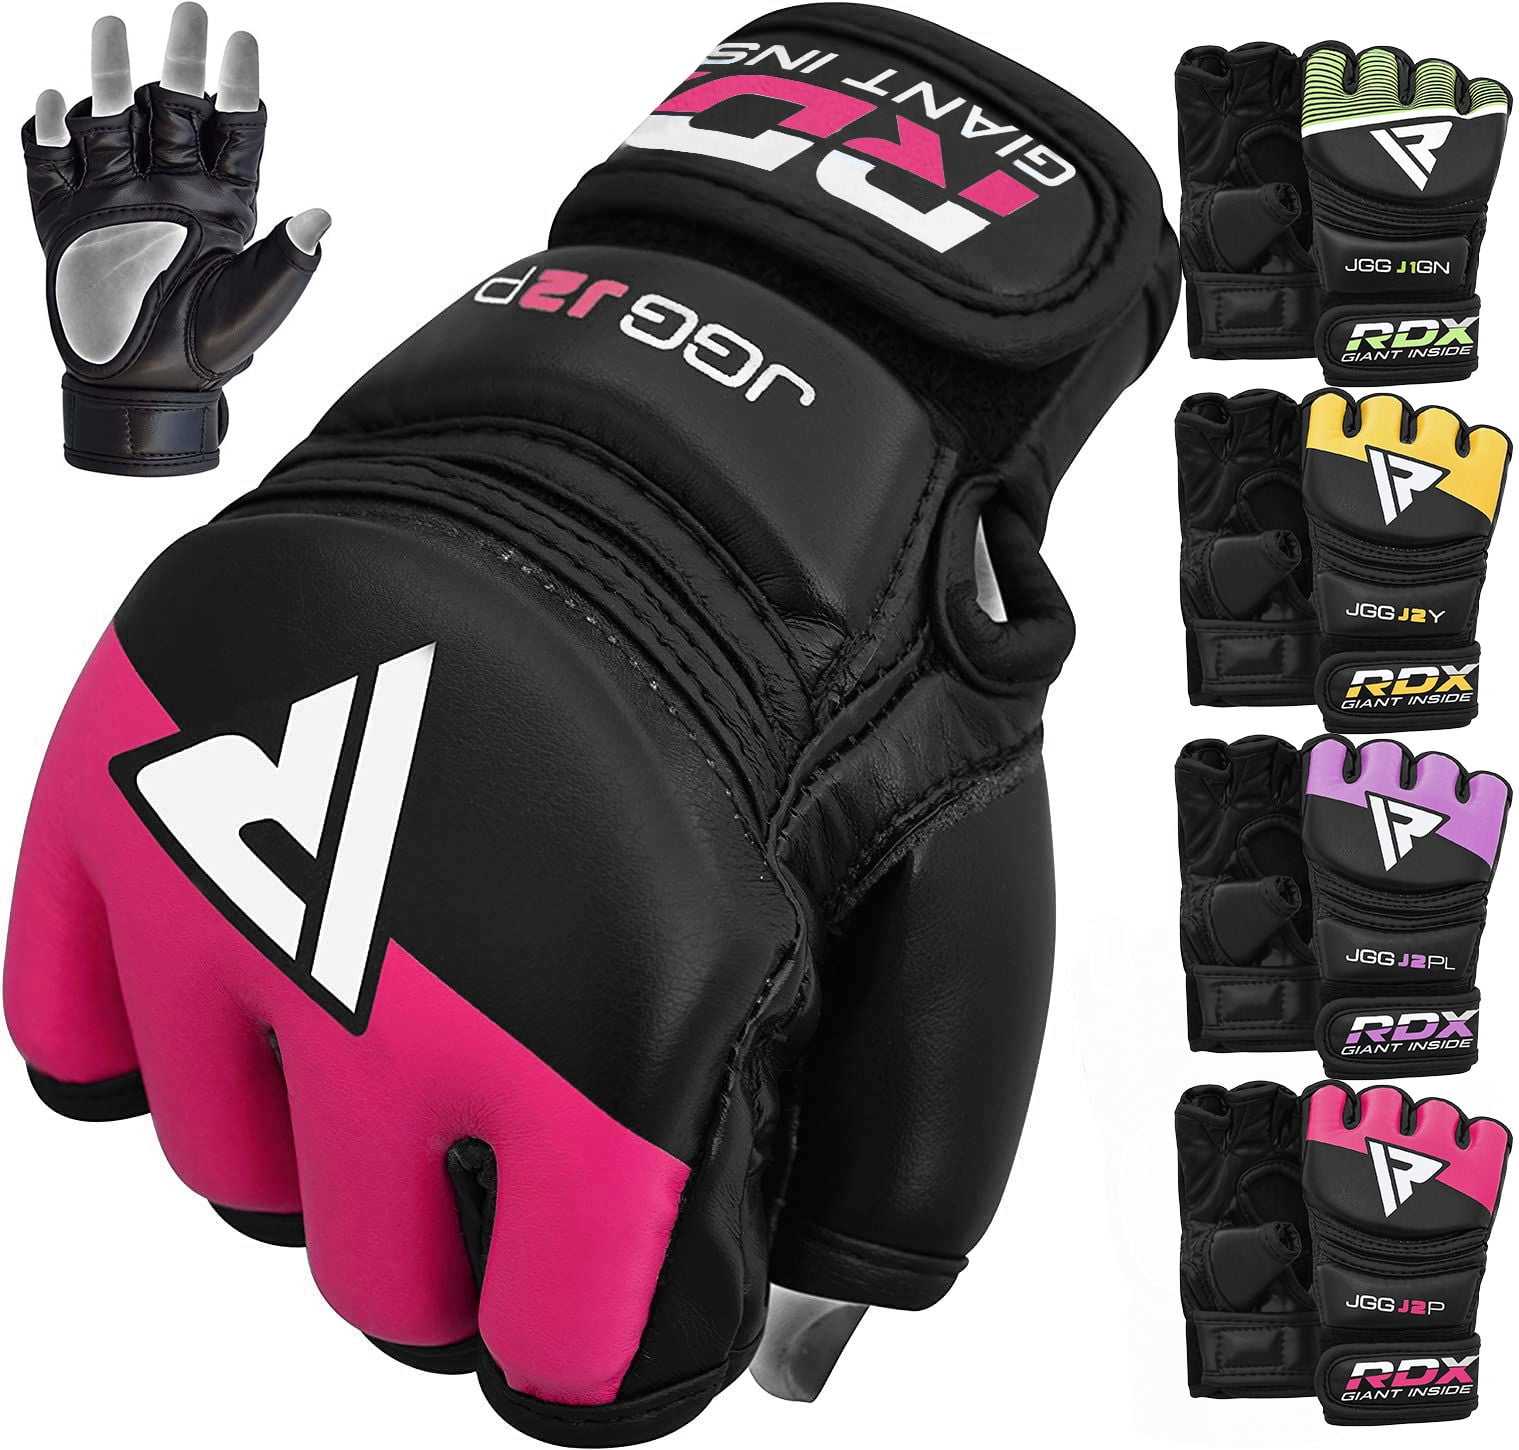 RDX Leather Grappling Boxing MMA Gloves Punch Fight Training Martial Arts 